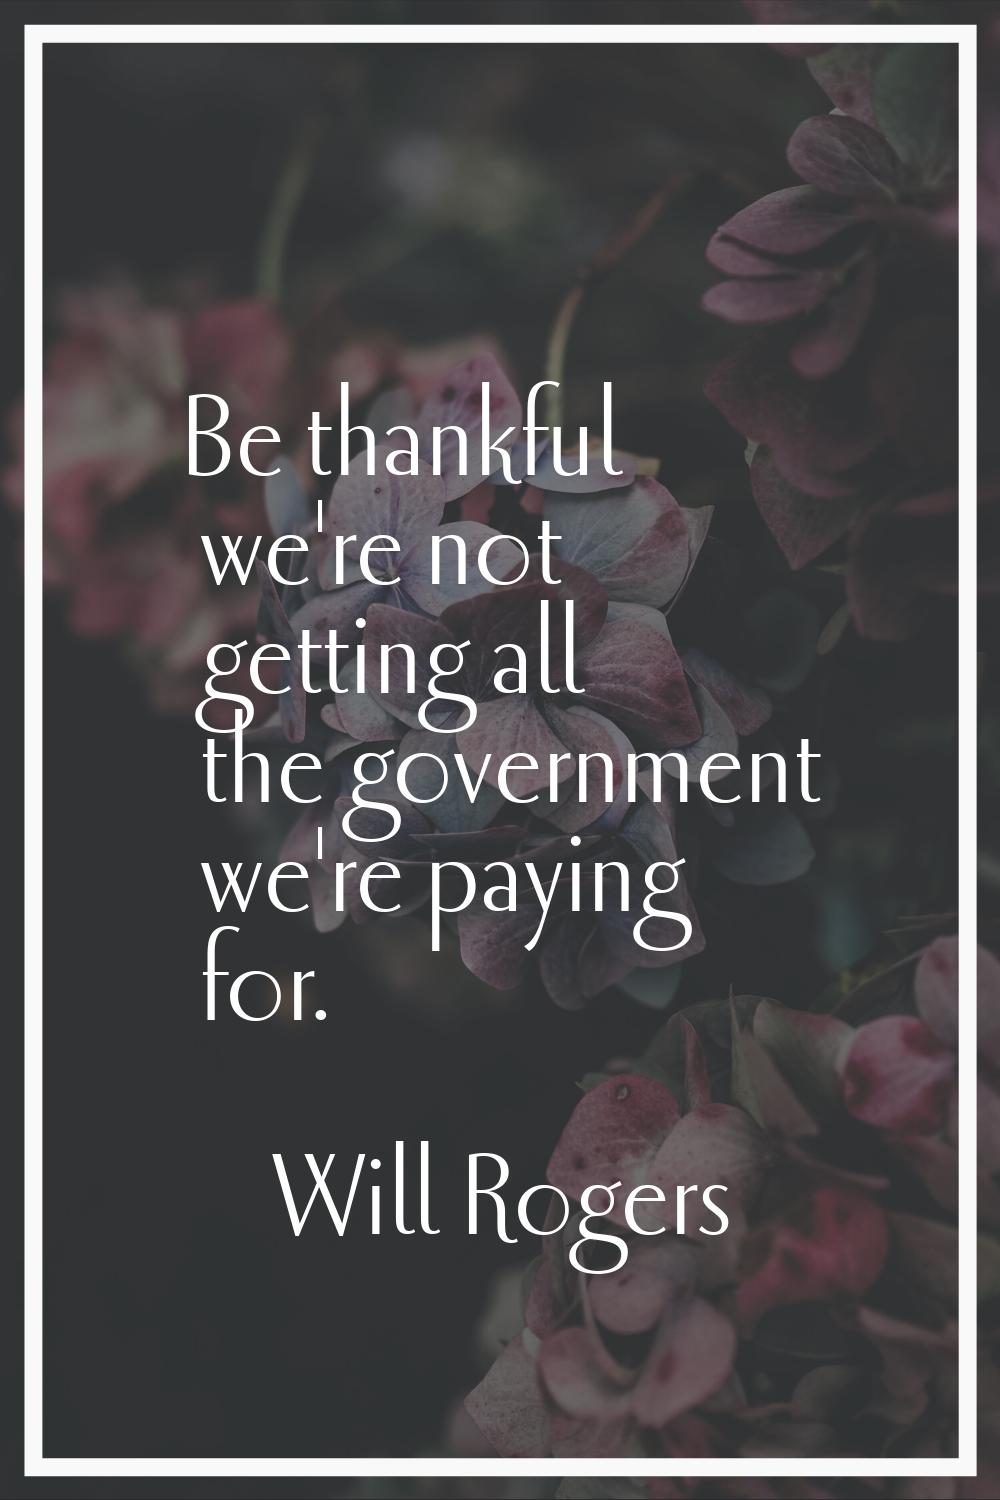 Be thankful we're not getting all the government we're paying for.